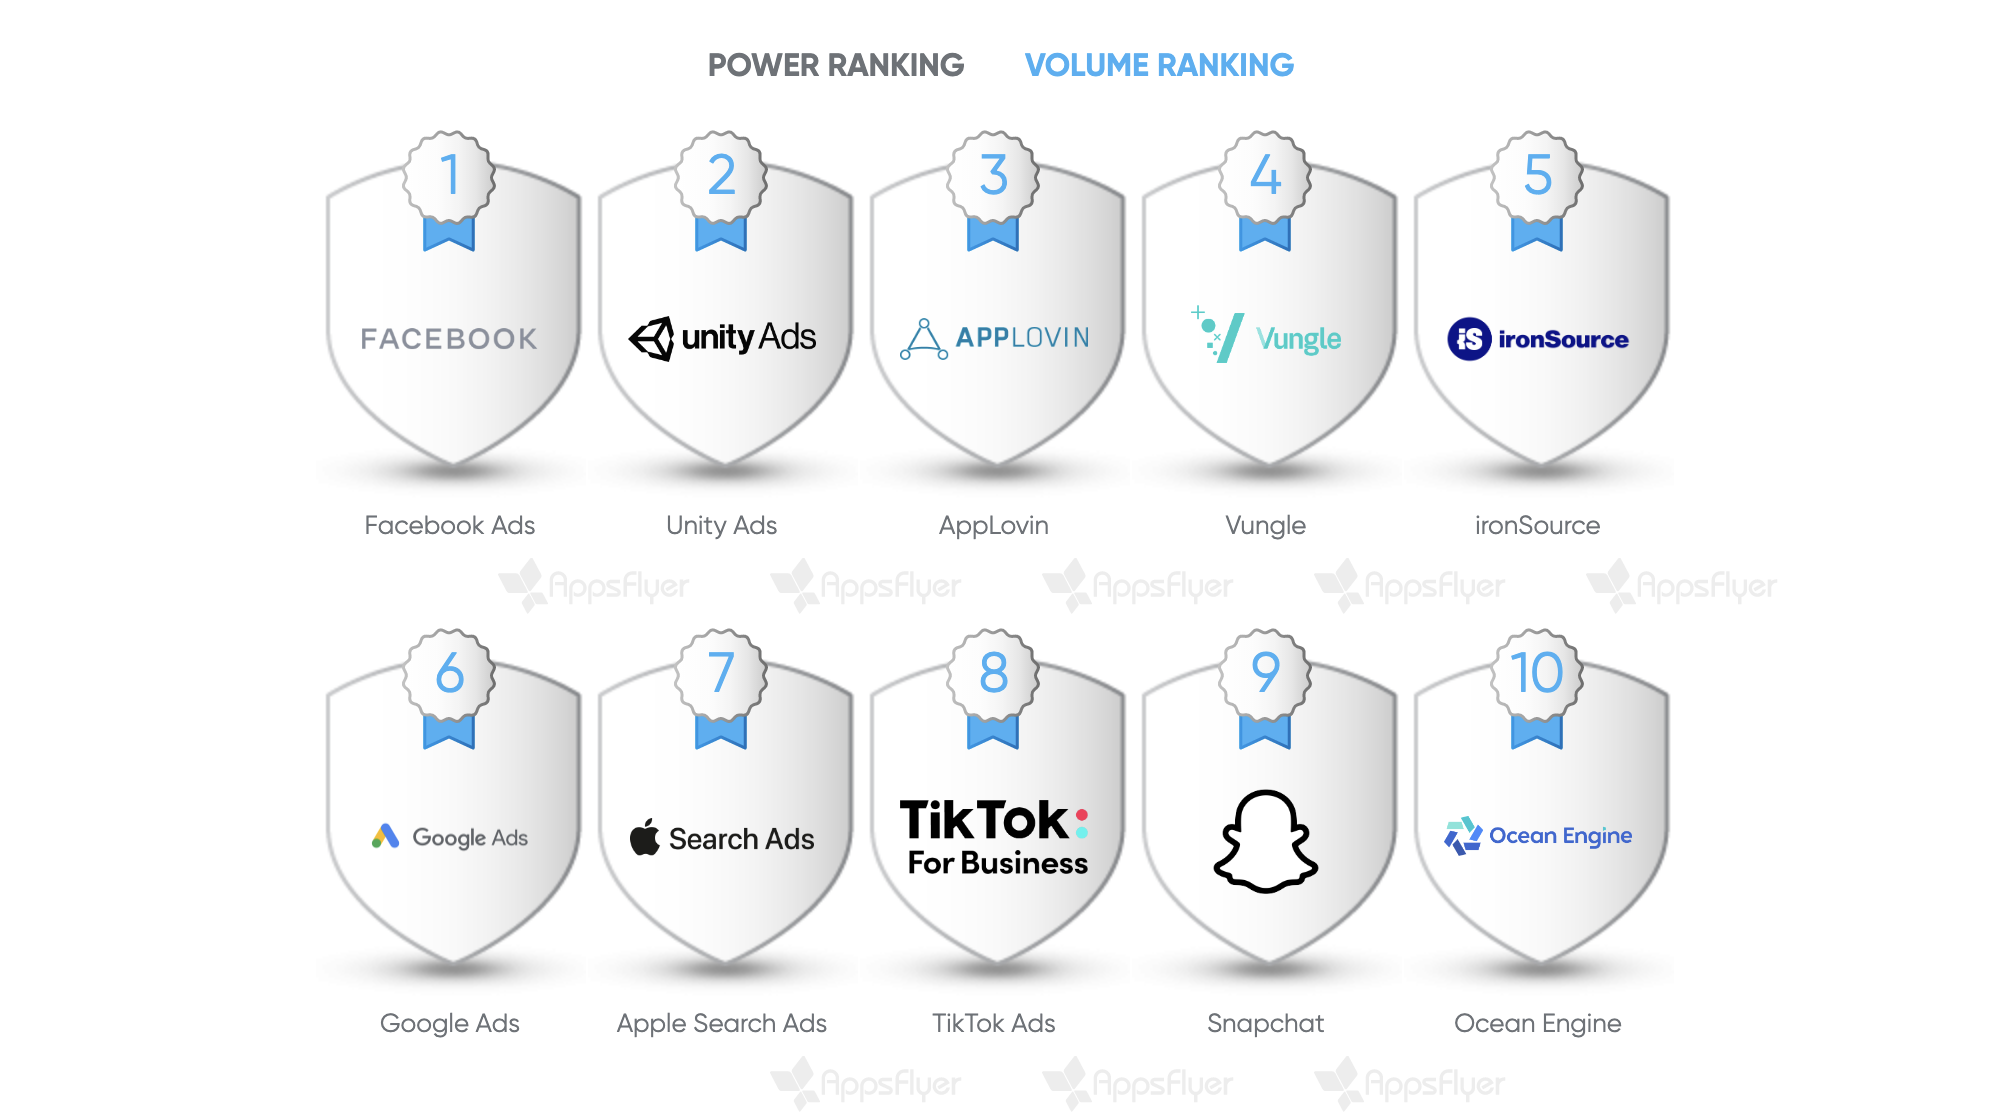 AppsFlyer Performance Index edition 12 Vungle rankings